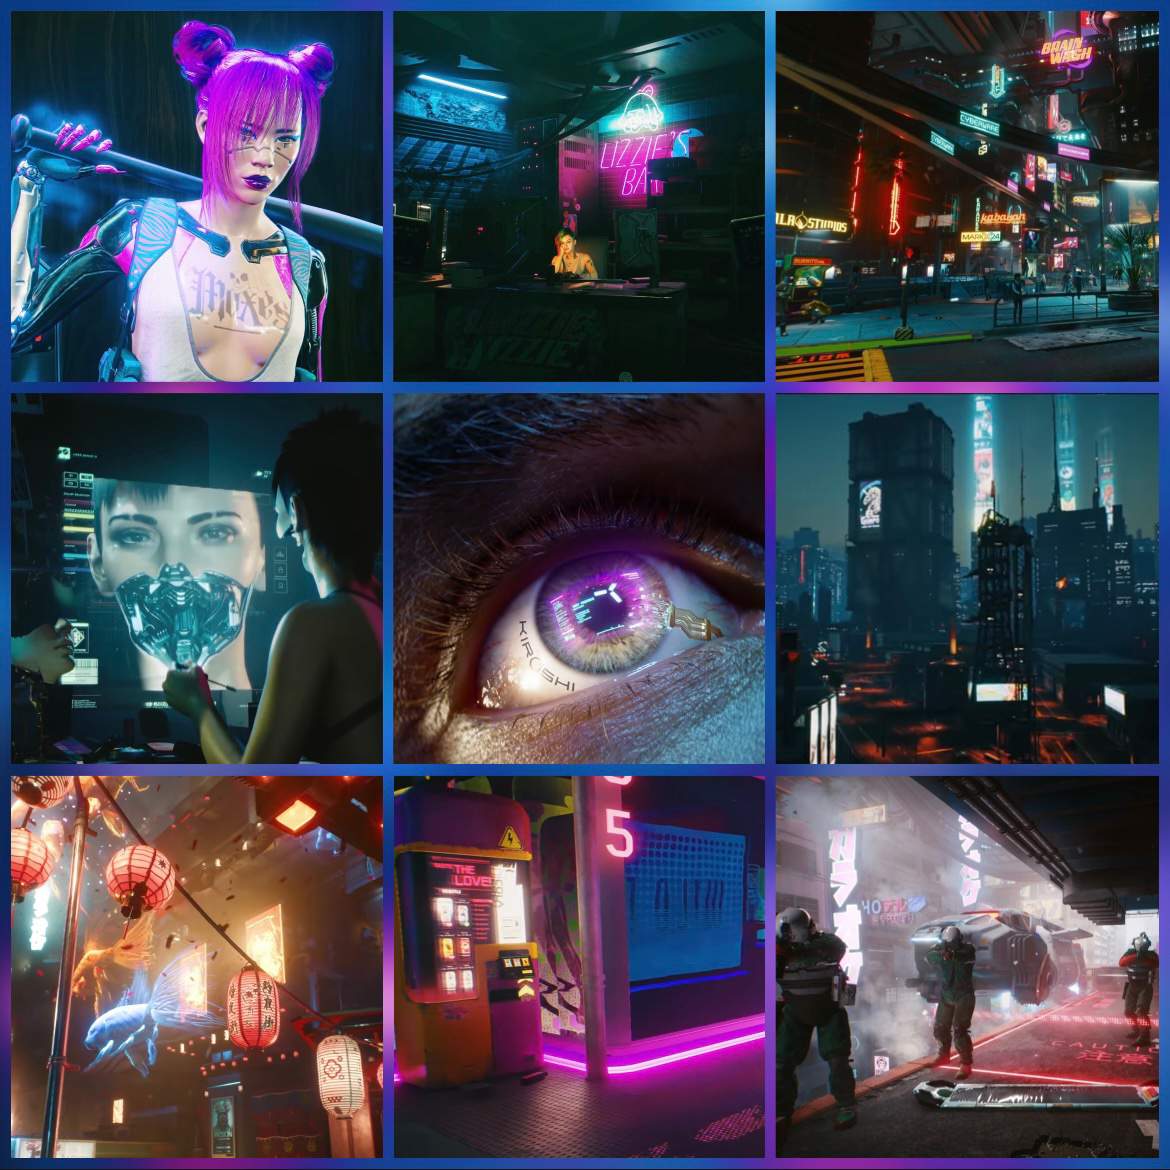 Cyberpunk 2077 is a 2020 action role-playing video game developed and published by CD Projekt. - Cyberpunk 2077